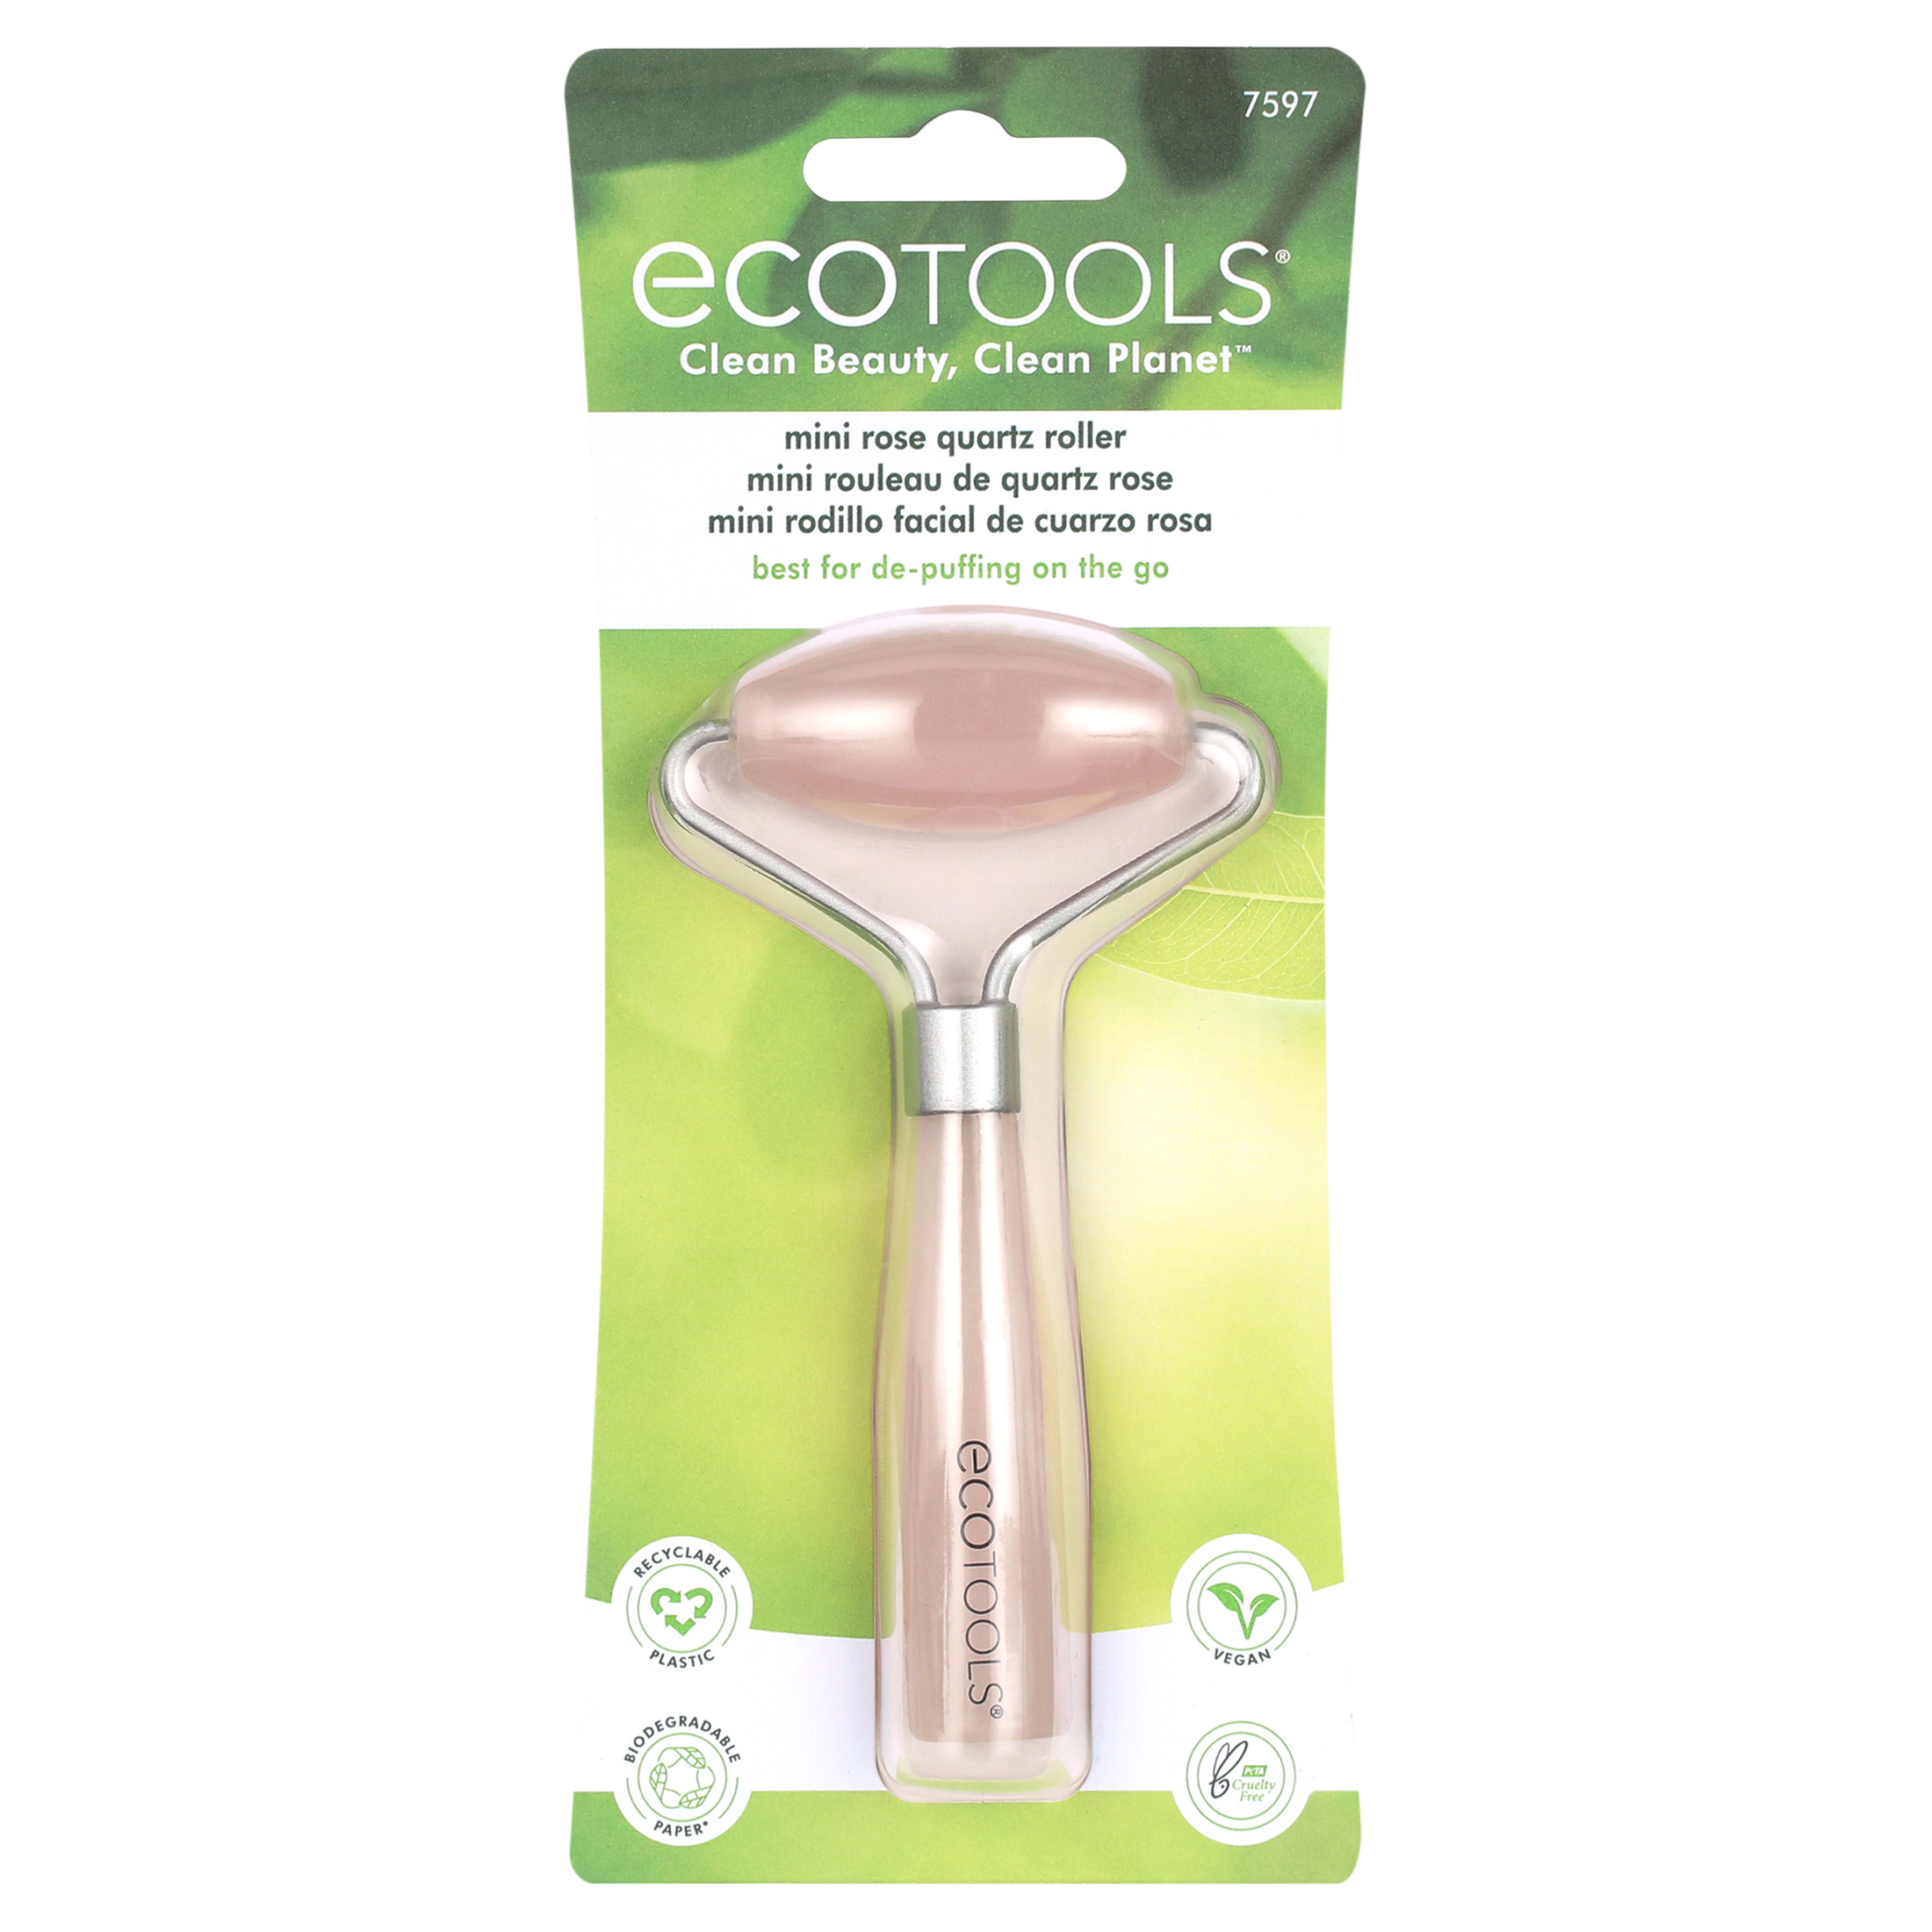 EcoTools Mini Rose Quartz Facial Roller and Massage Roller, Skincare and Sculpting Tool,1 Count - image 2 of 9